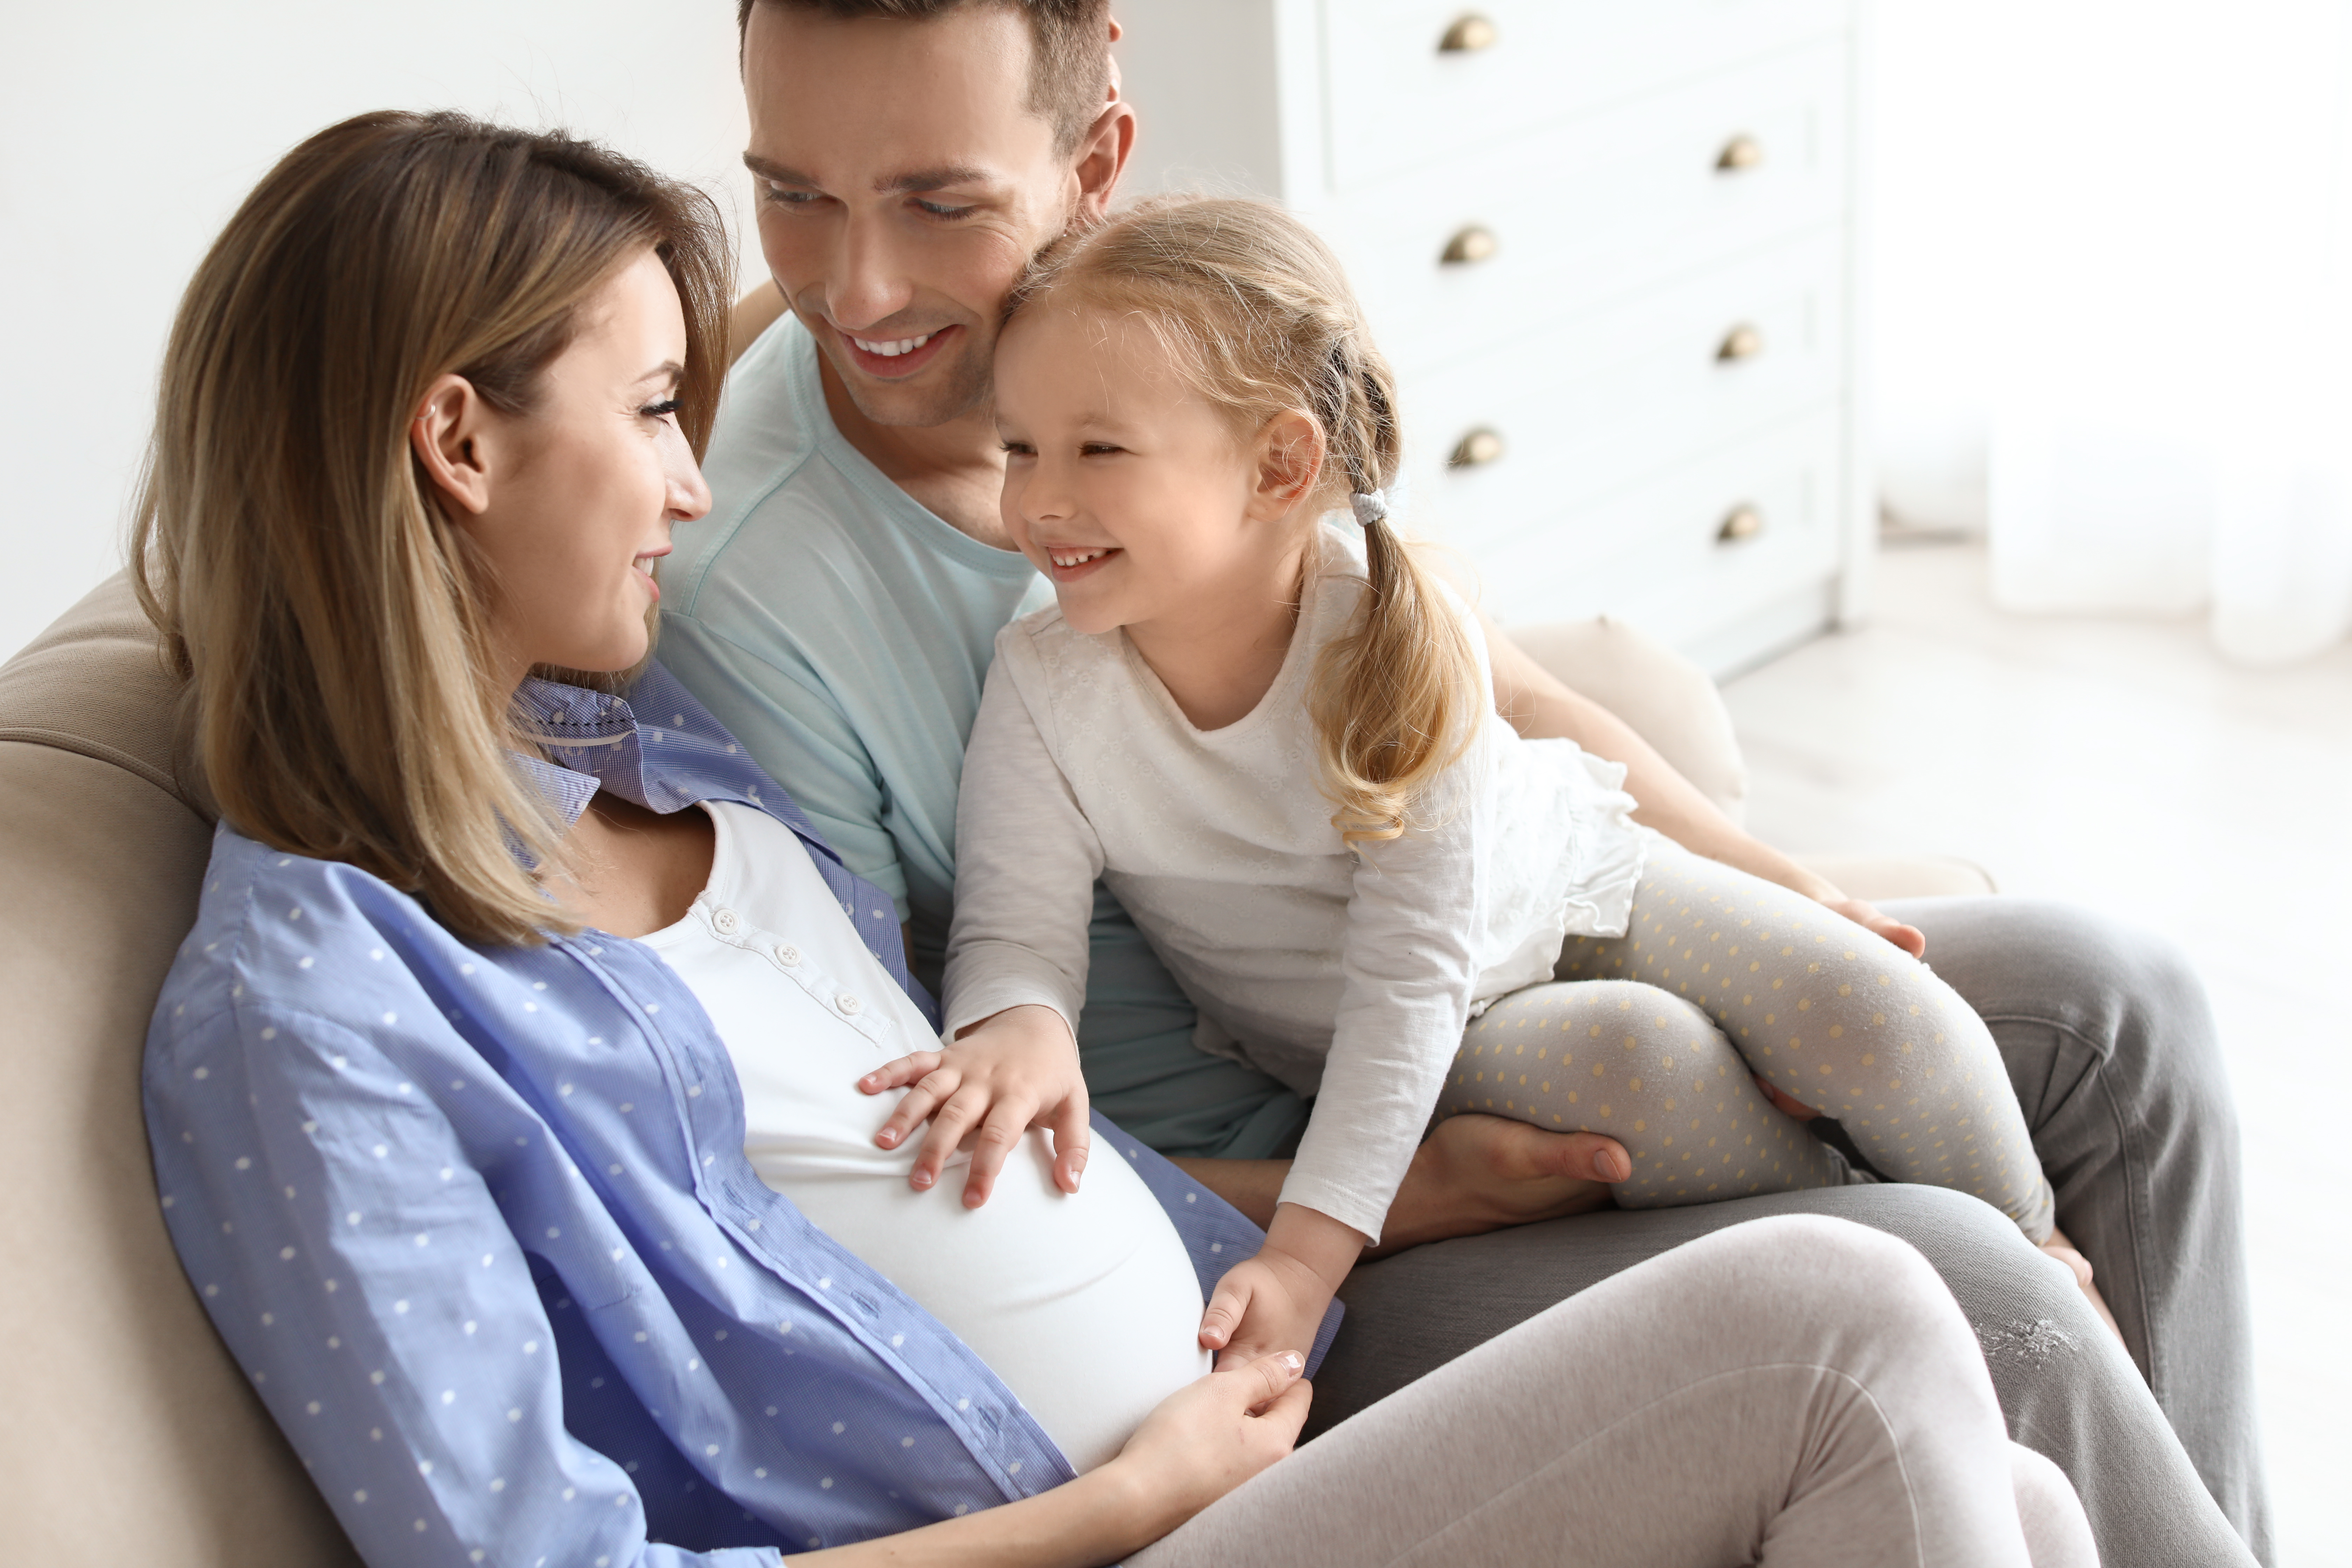 Young pregnant woman with her family at home. | Source: Shutterstock